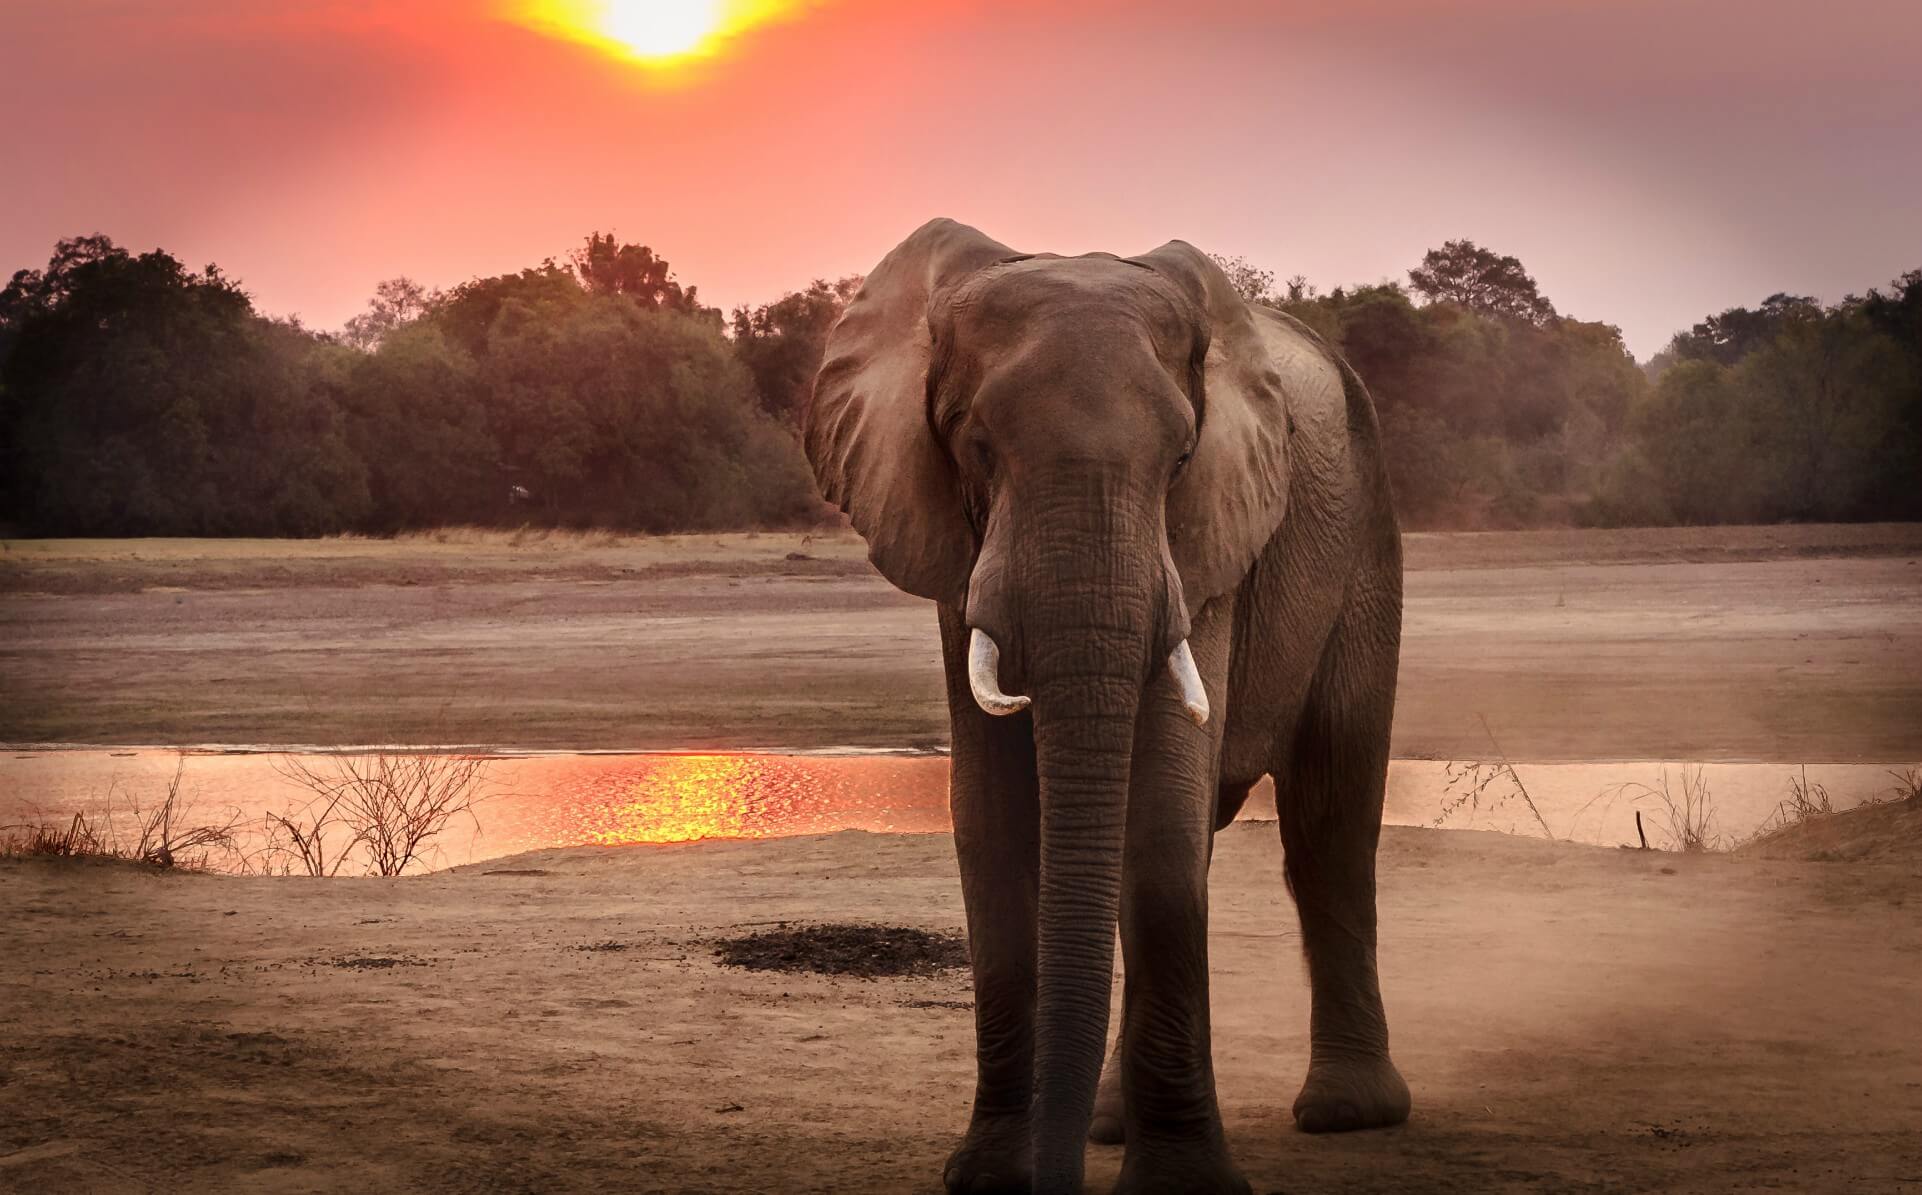 wildlife-photography-of-elephant-during-golden-hour-1054655 (1)